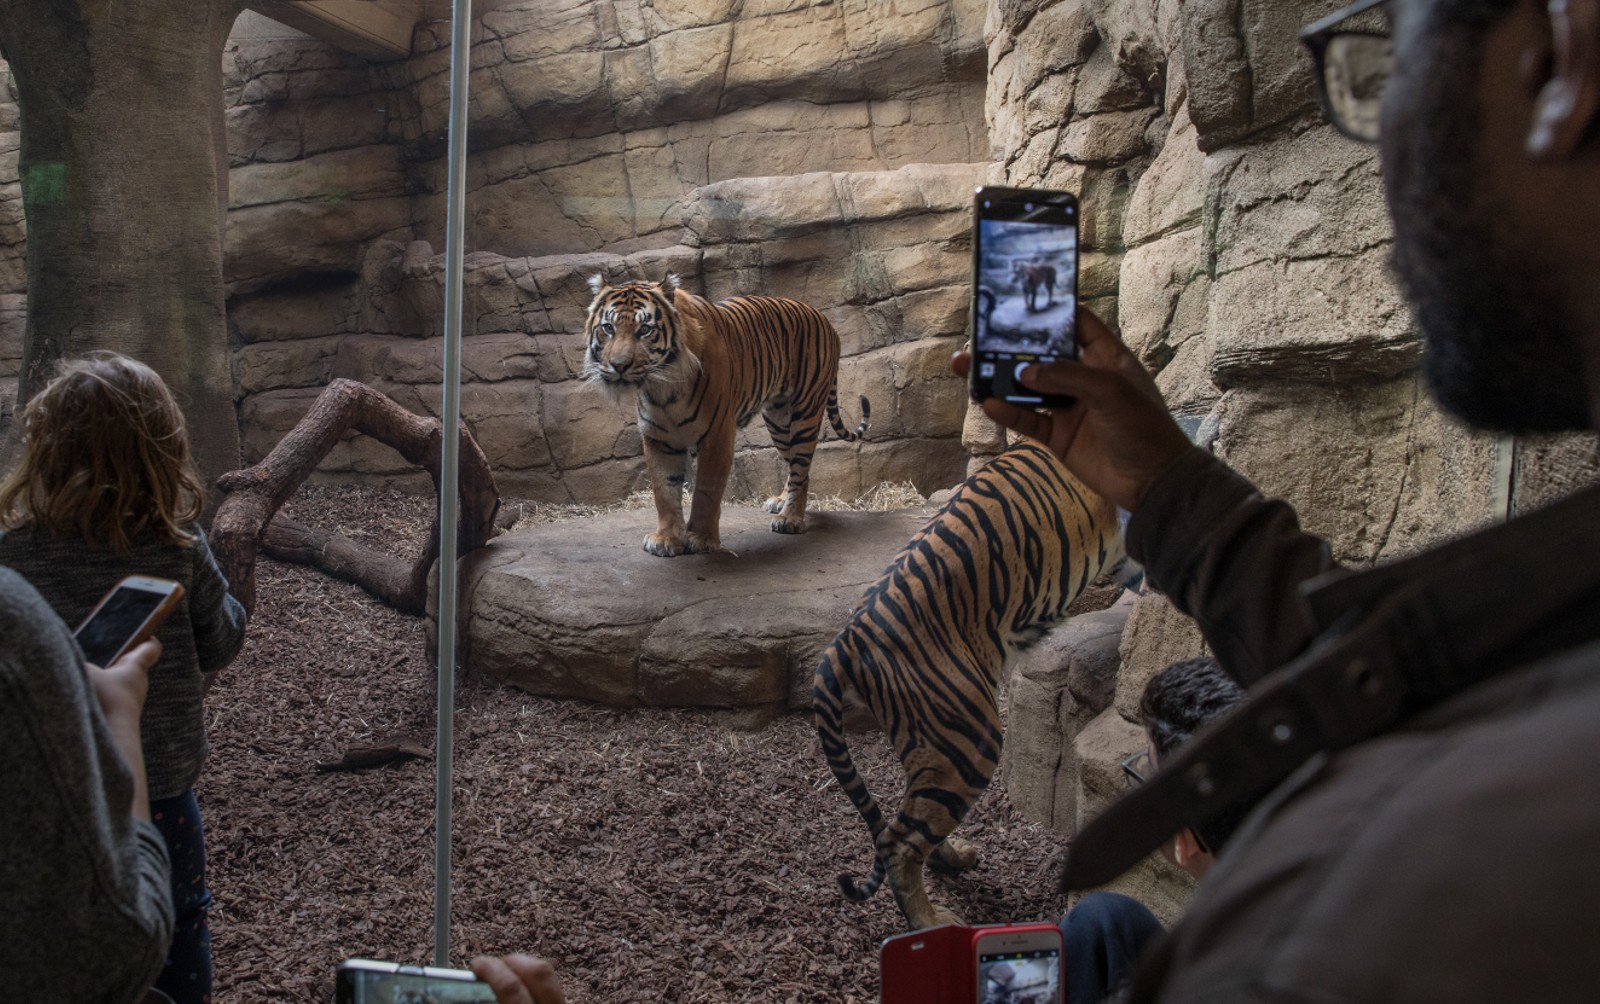 A tiger stands in a zoo enclosure surrounded by people taking photos of it with their mobile phones.